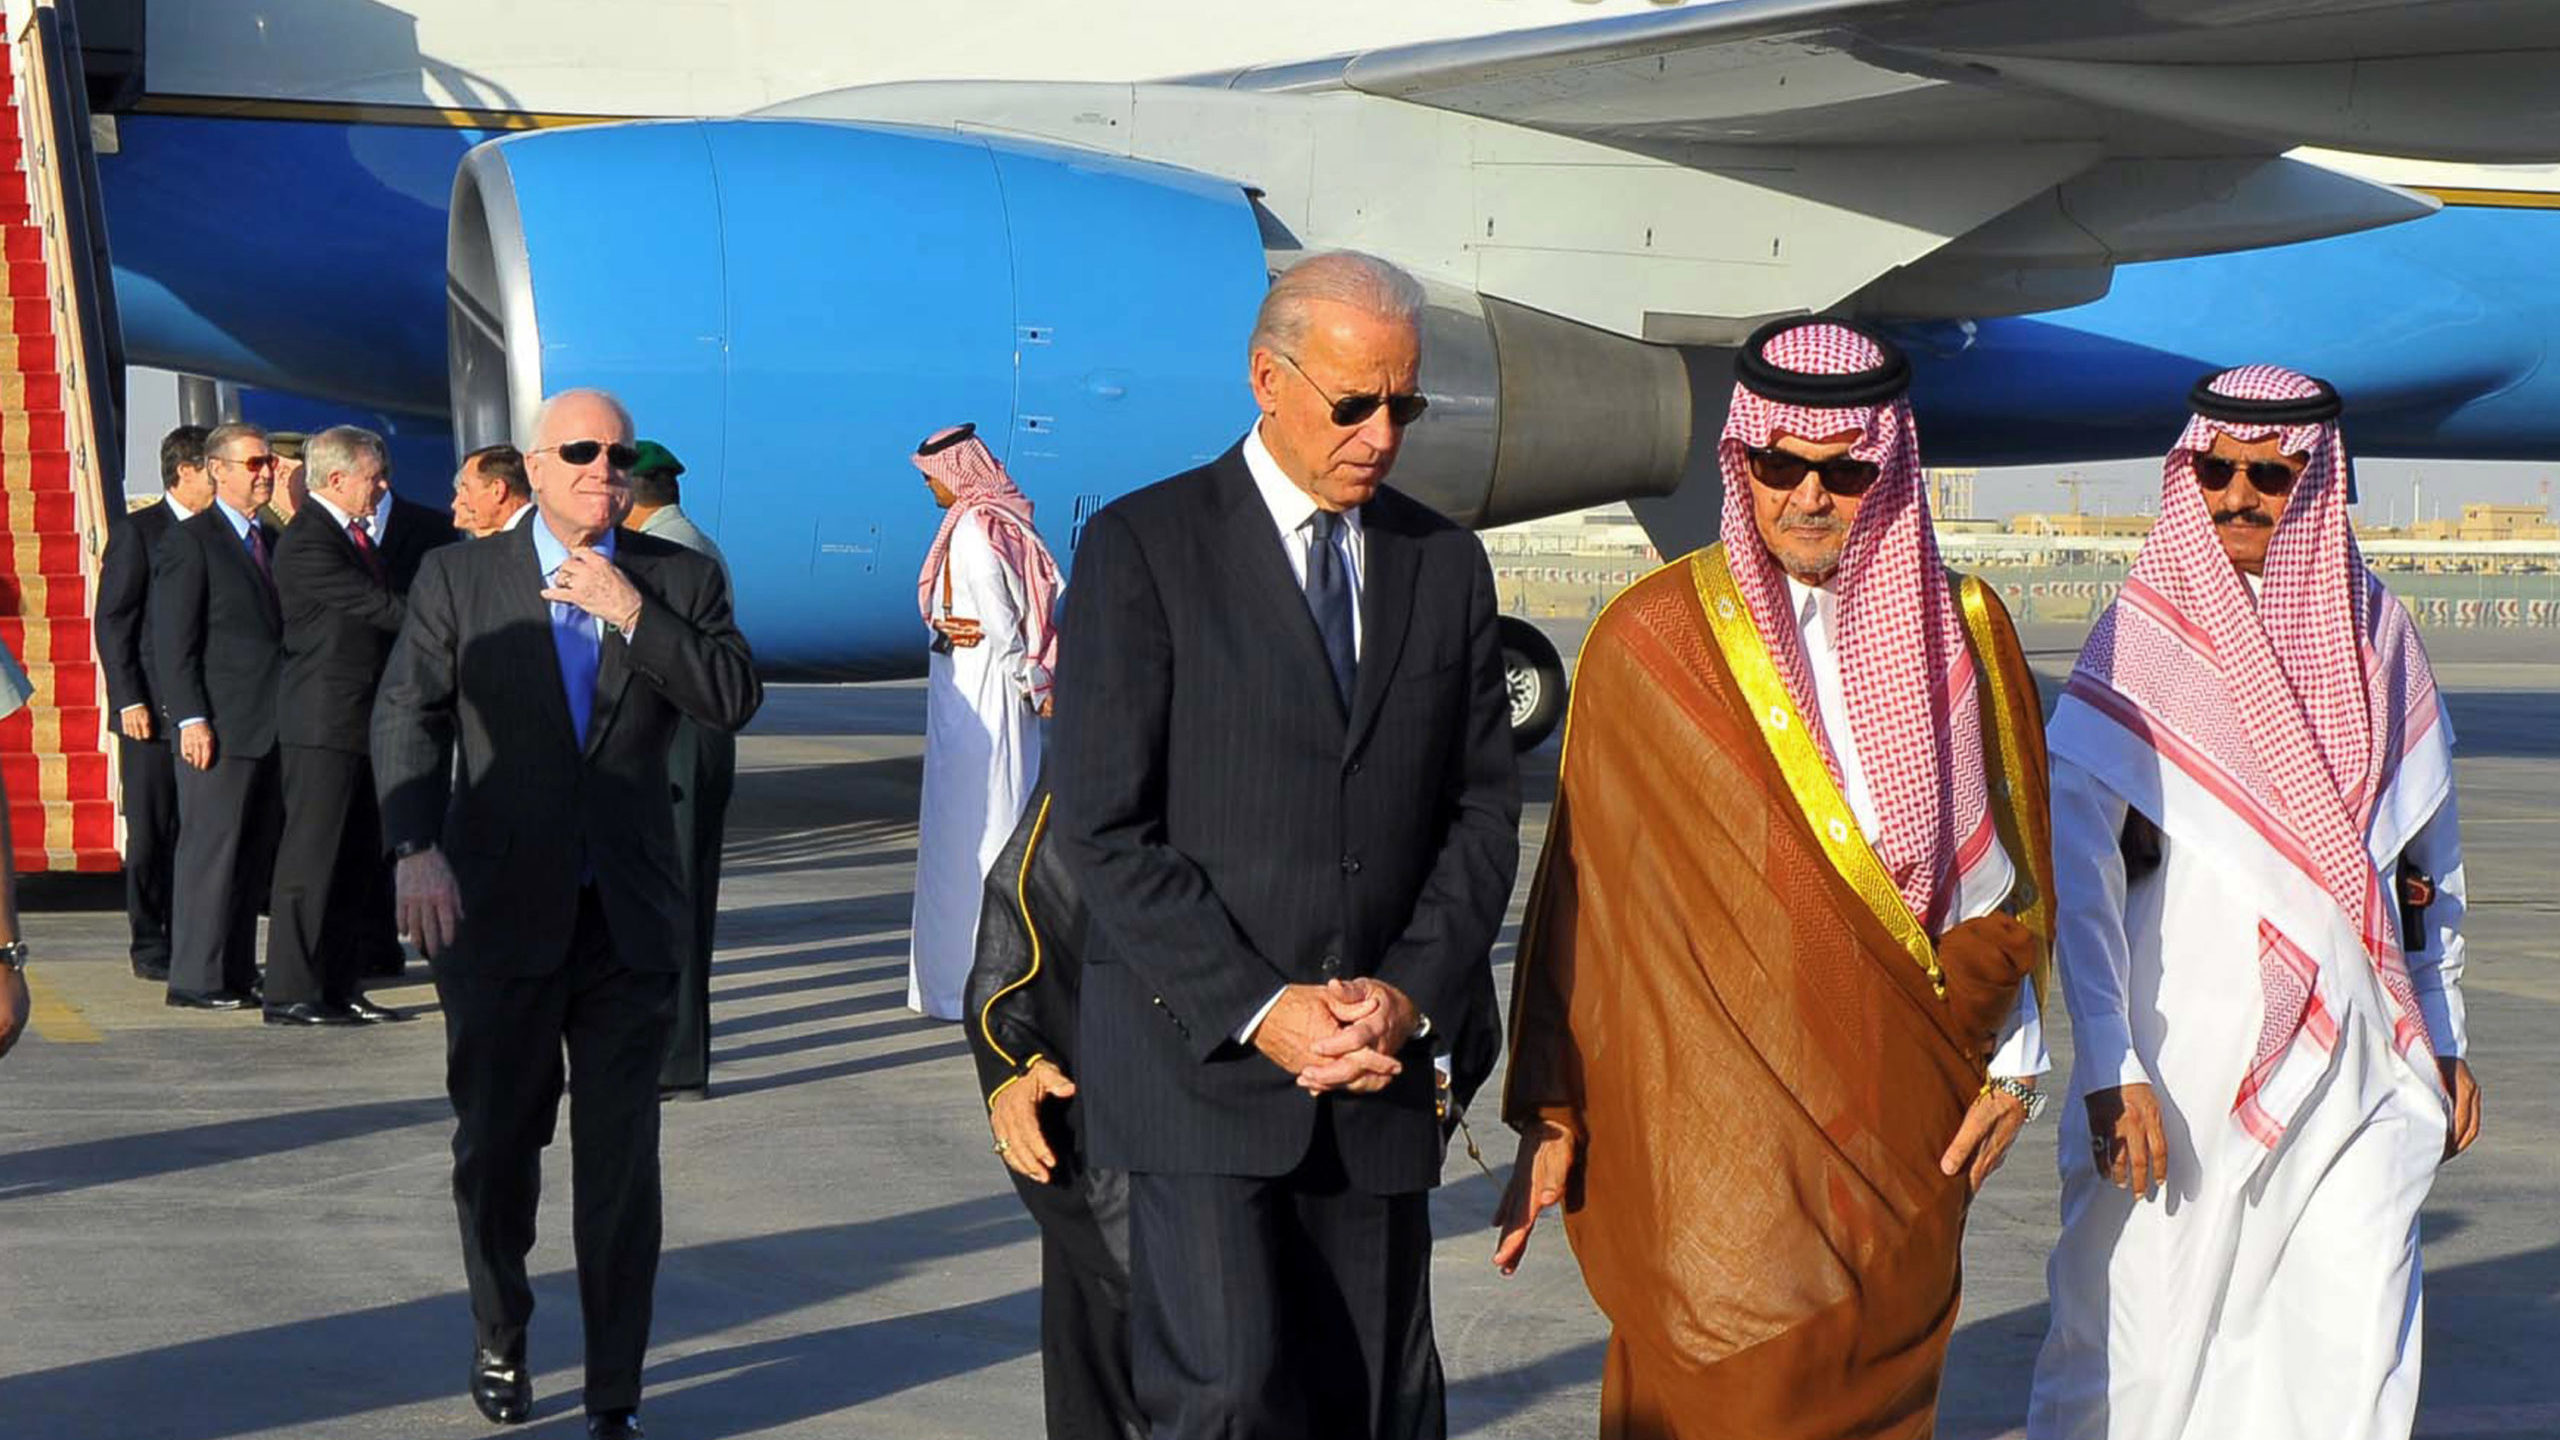 Biden and America’s Policies in the Middle East